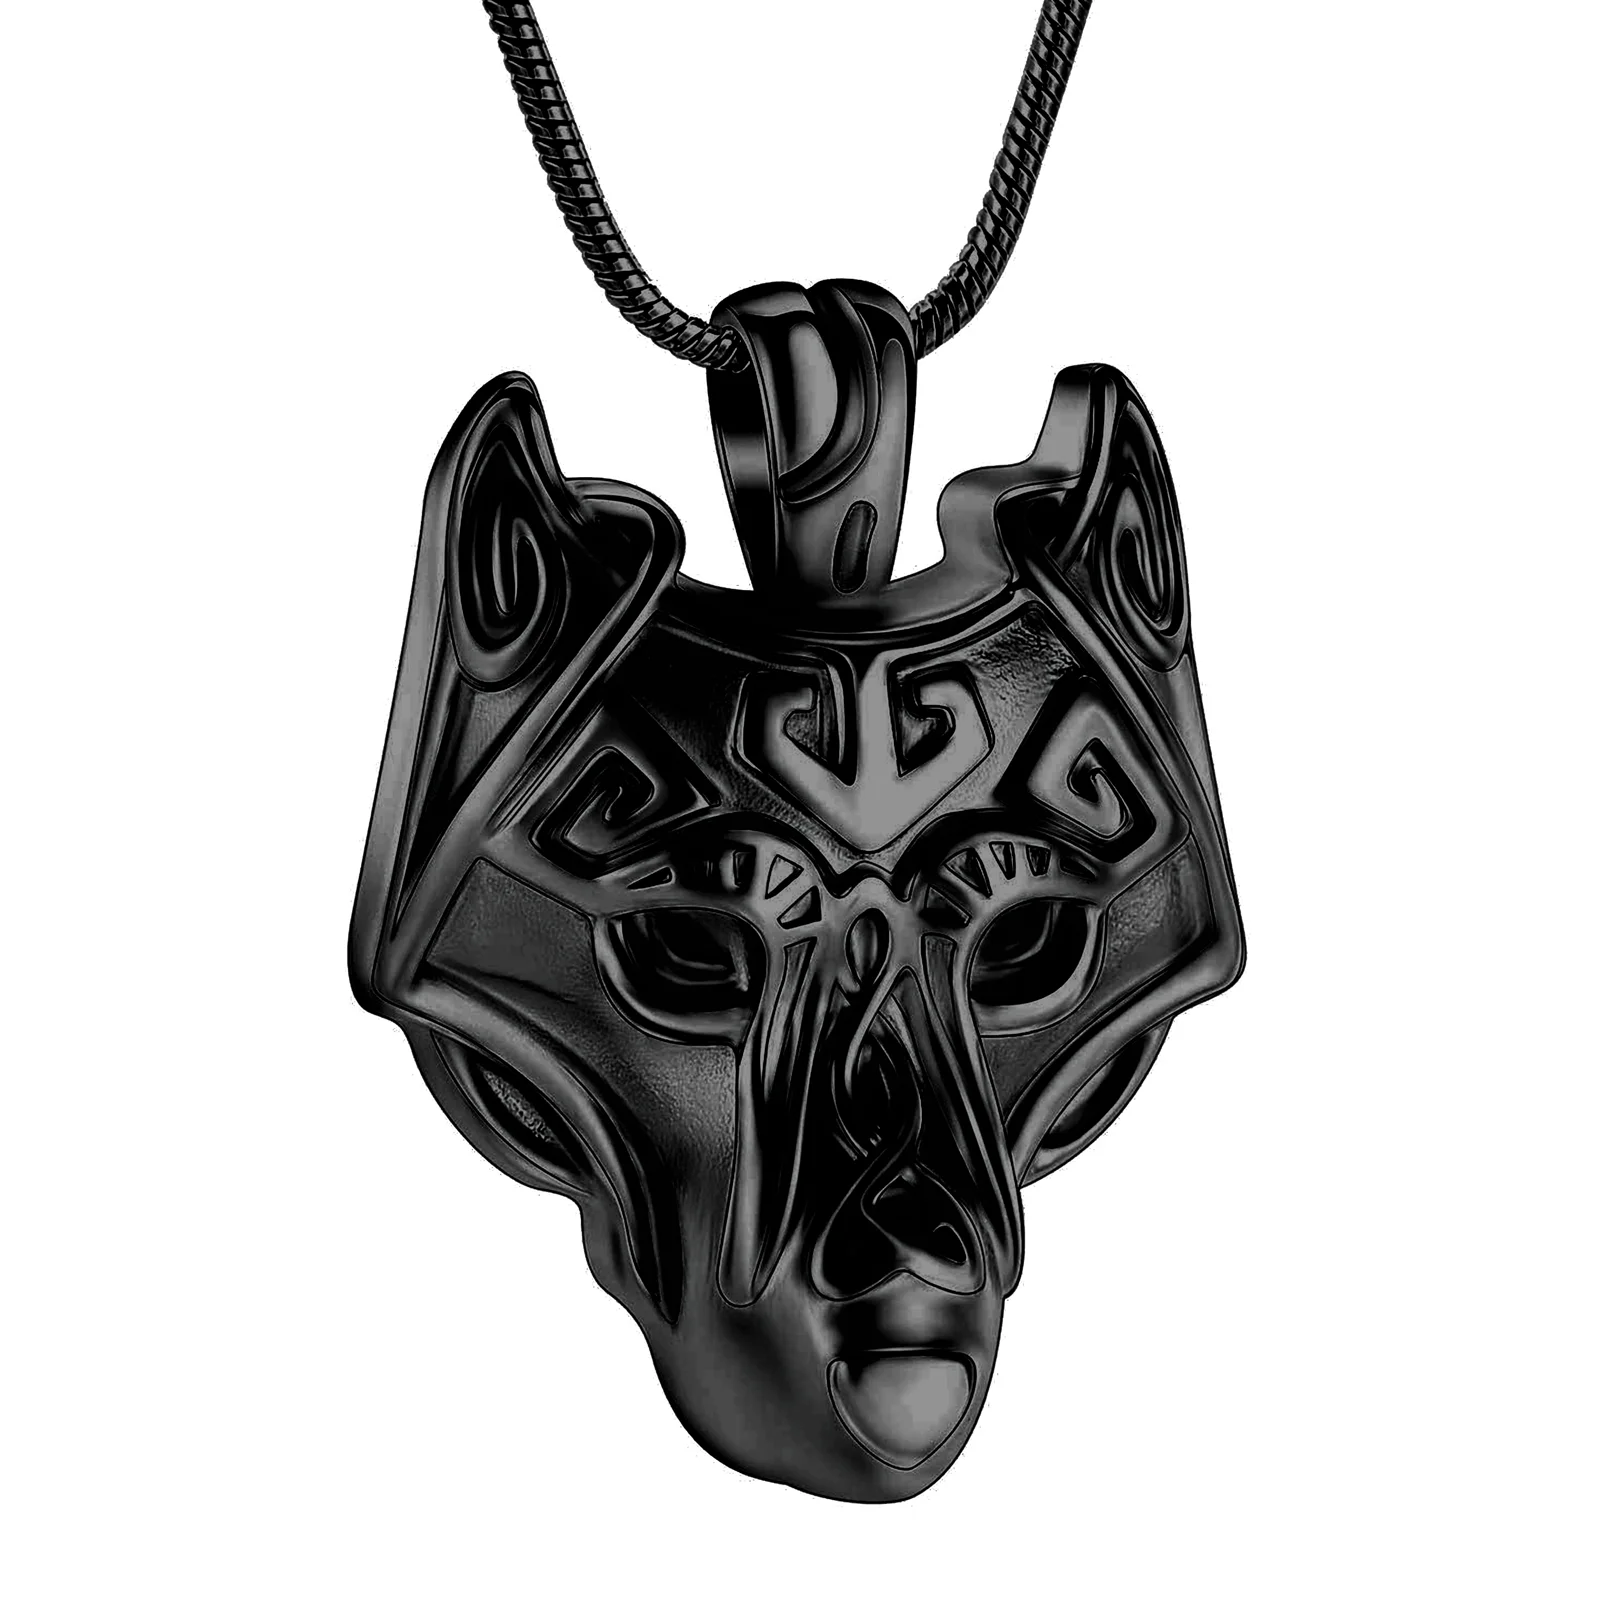 

Wolf Head Stainless Steel Cremation Necklace For Men Keepsake Jewelry Hold Ashes Of Loved Ones Pet Memorial Urn Pendant